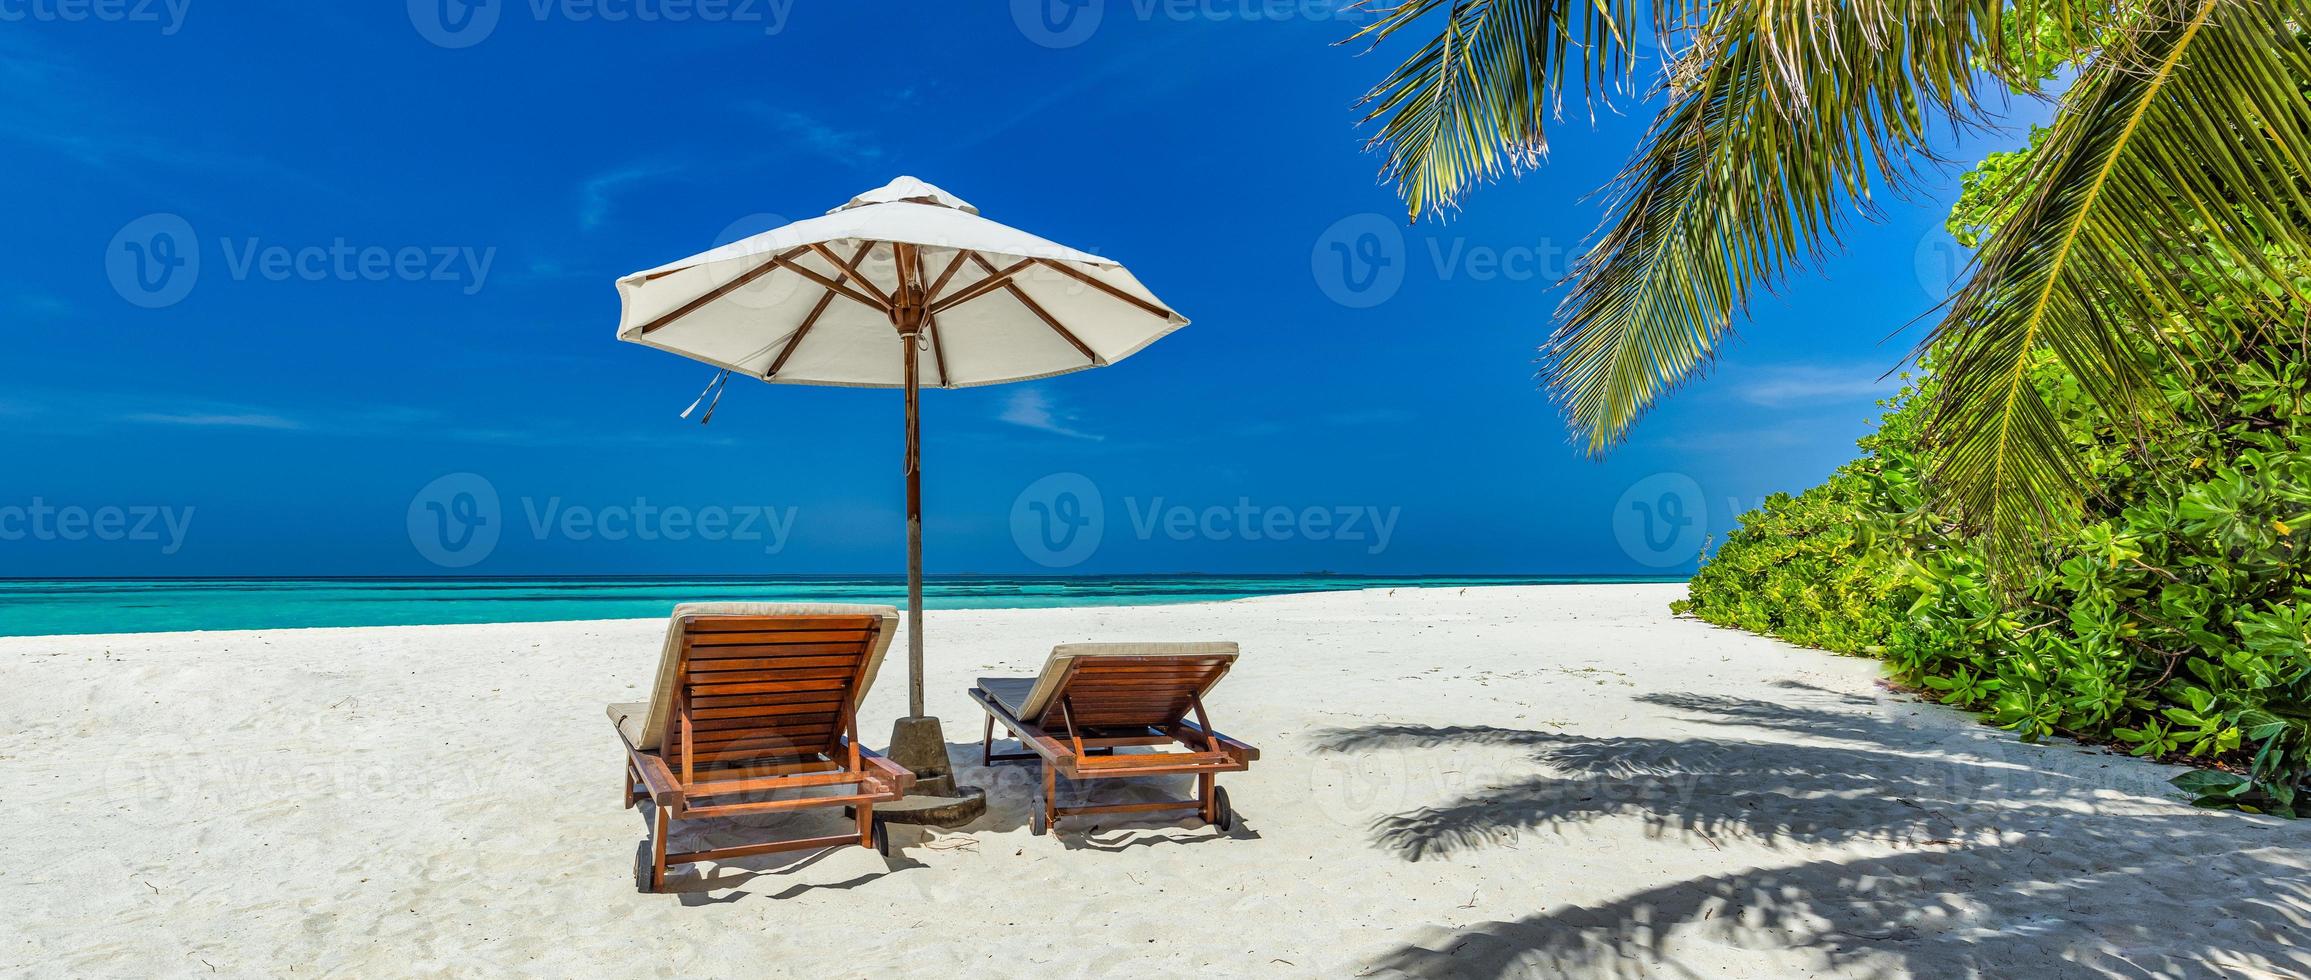 Beautiful tropical sunny shore, couple sun beds chairs umbrella under palm tree leaves. Sea sand sky. Romantic relax lifestyle panoramic island beach background. Summer travel exotic vacation panorama photo